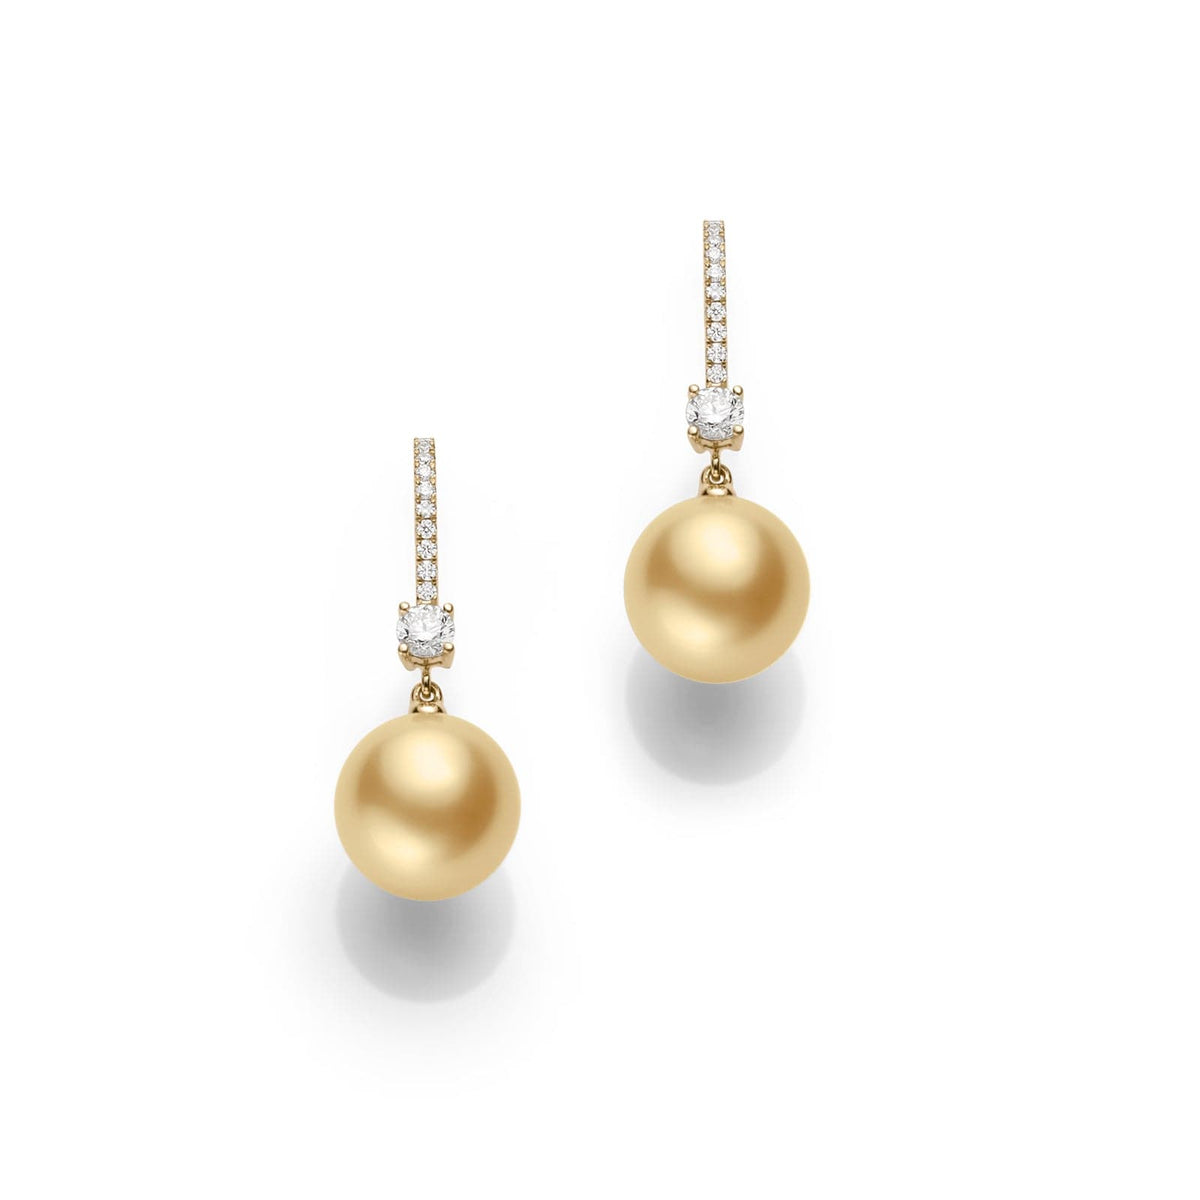 18K Yellow Gold South Sea Cultured Pearl Drop Earrings with Diamonds